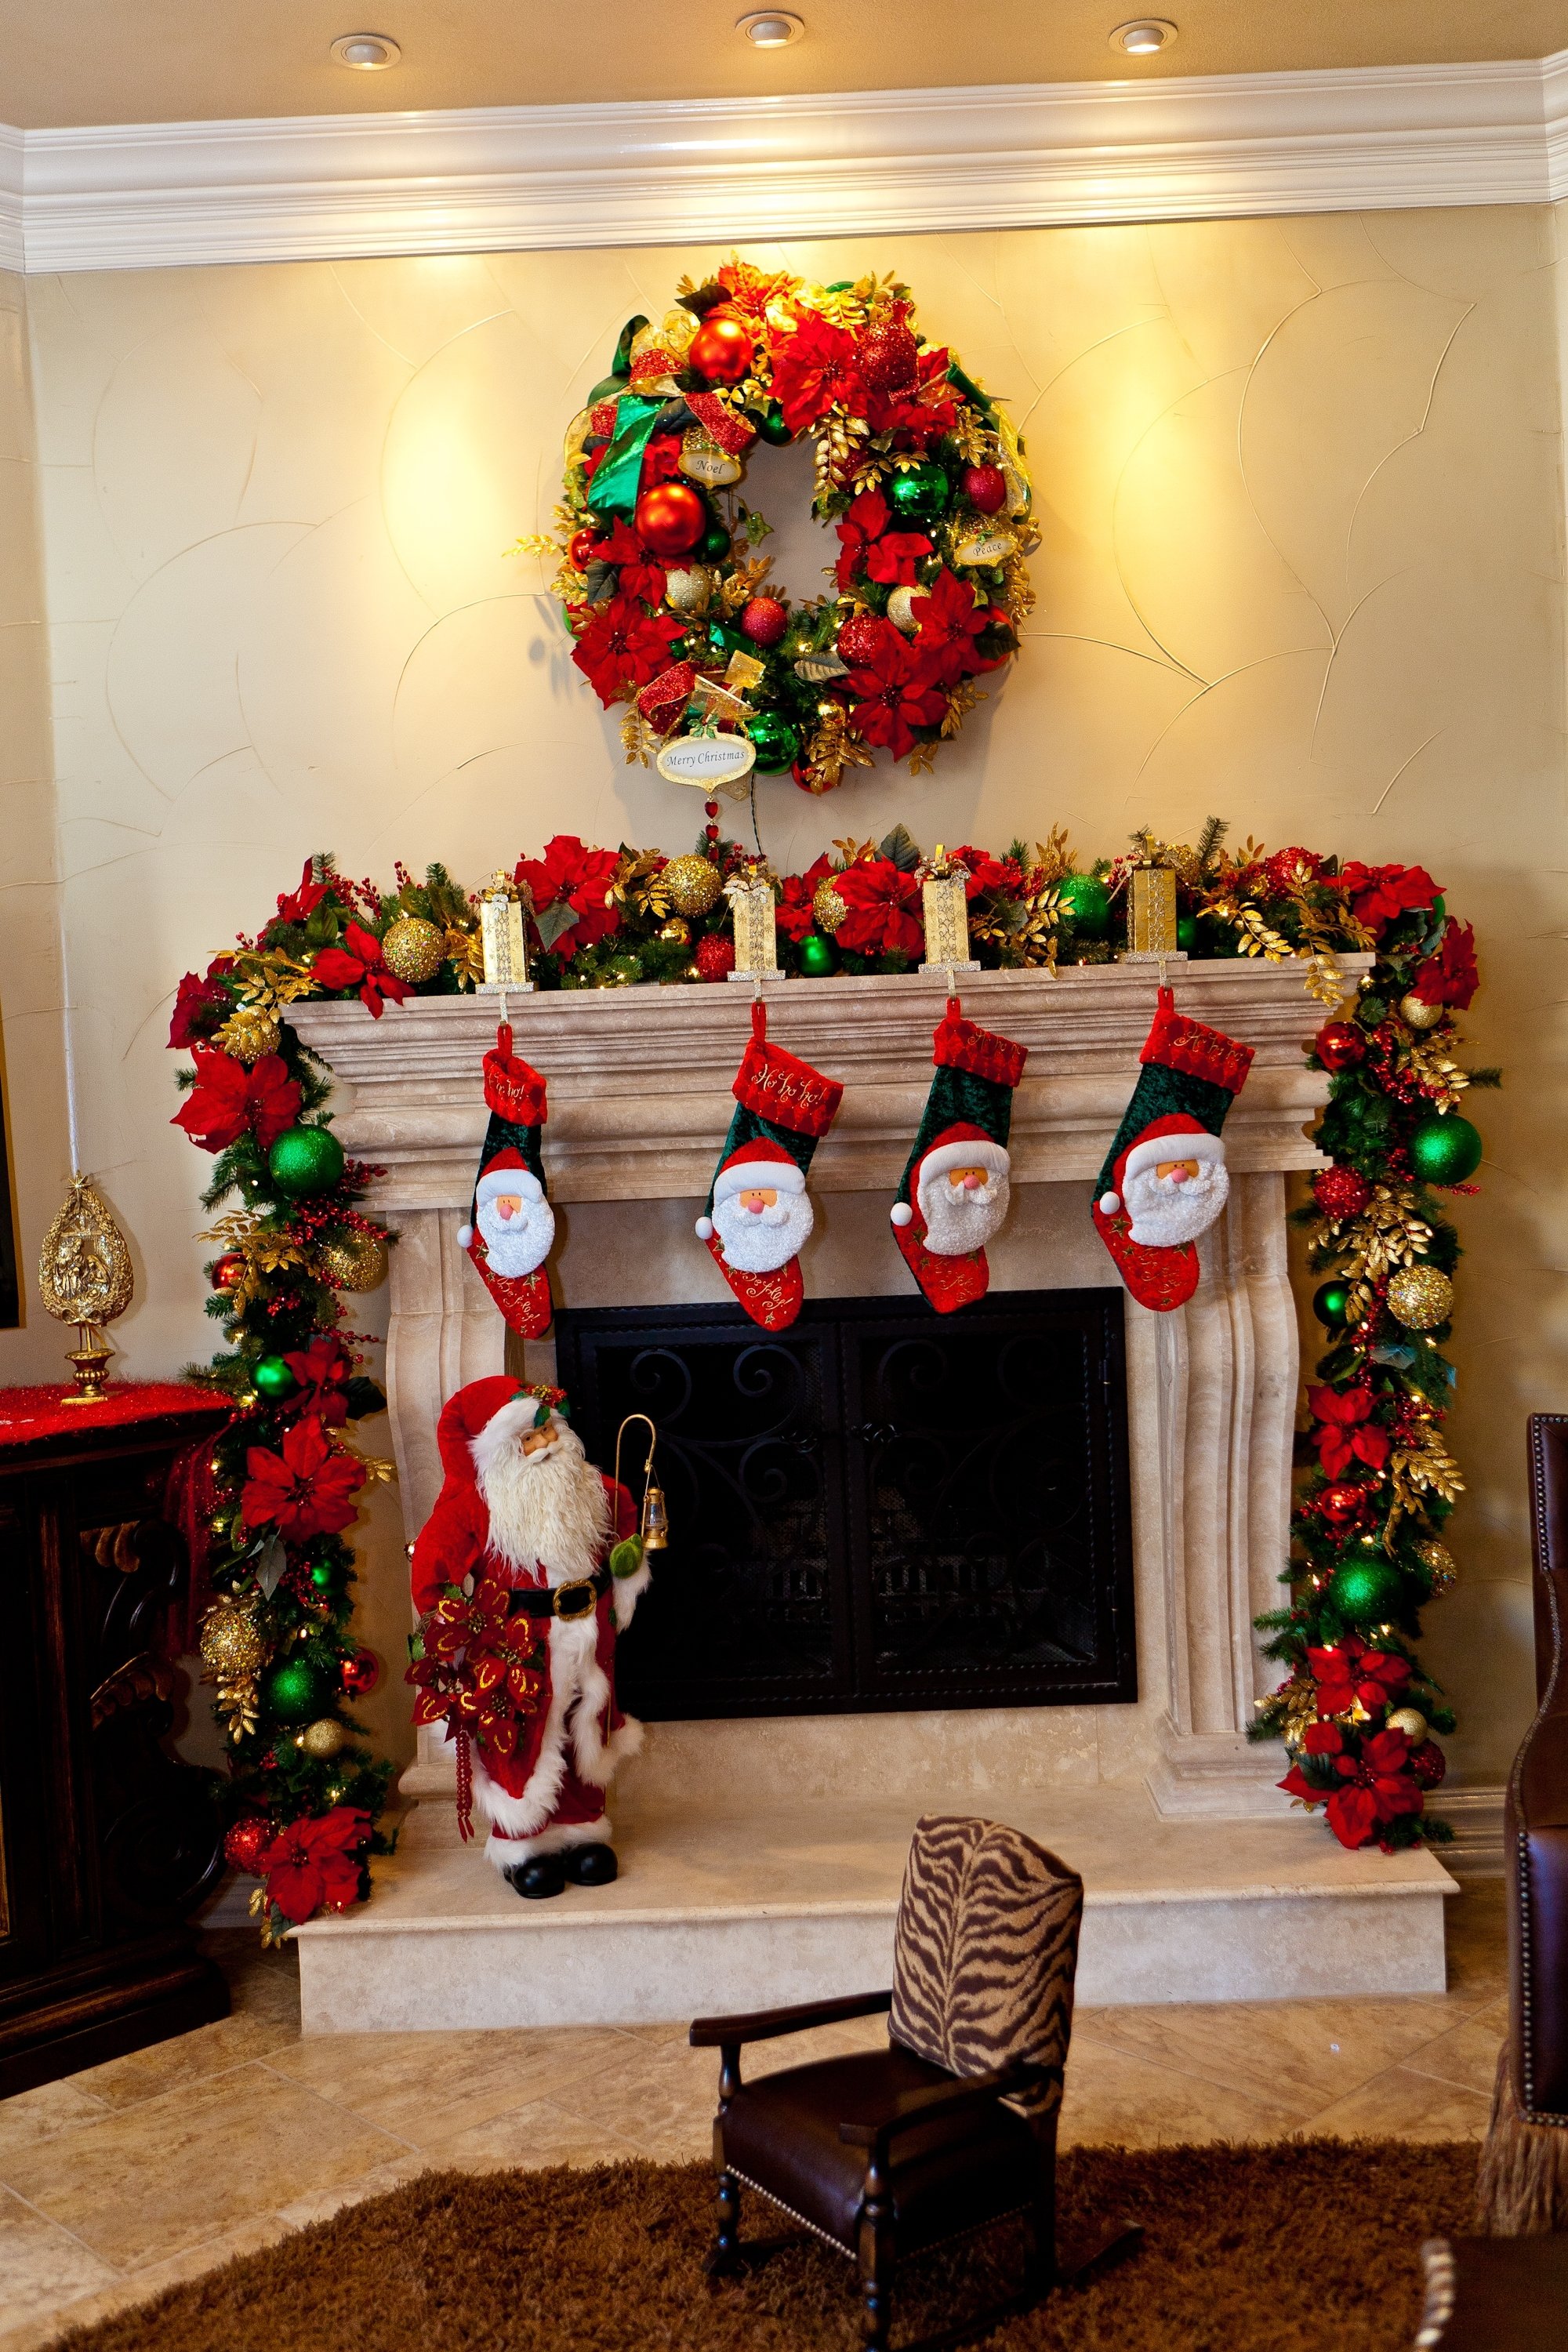 10 Pretty Fireplace Mantel Christmas Decorating Ideas Photos pleasant fireplace for christmas decor presenting magnificent 2022